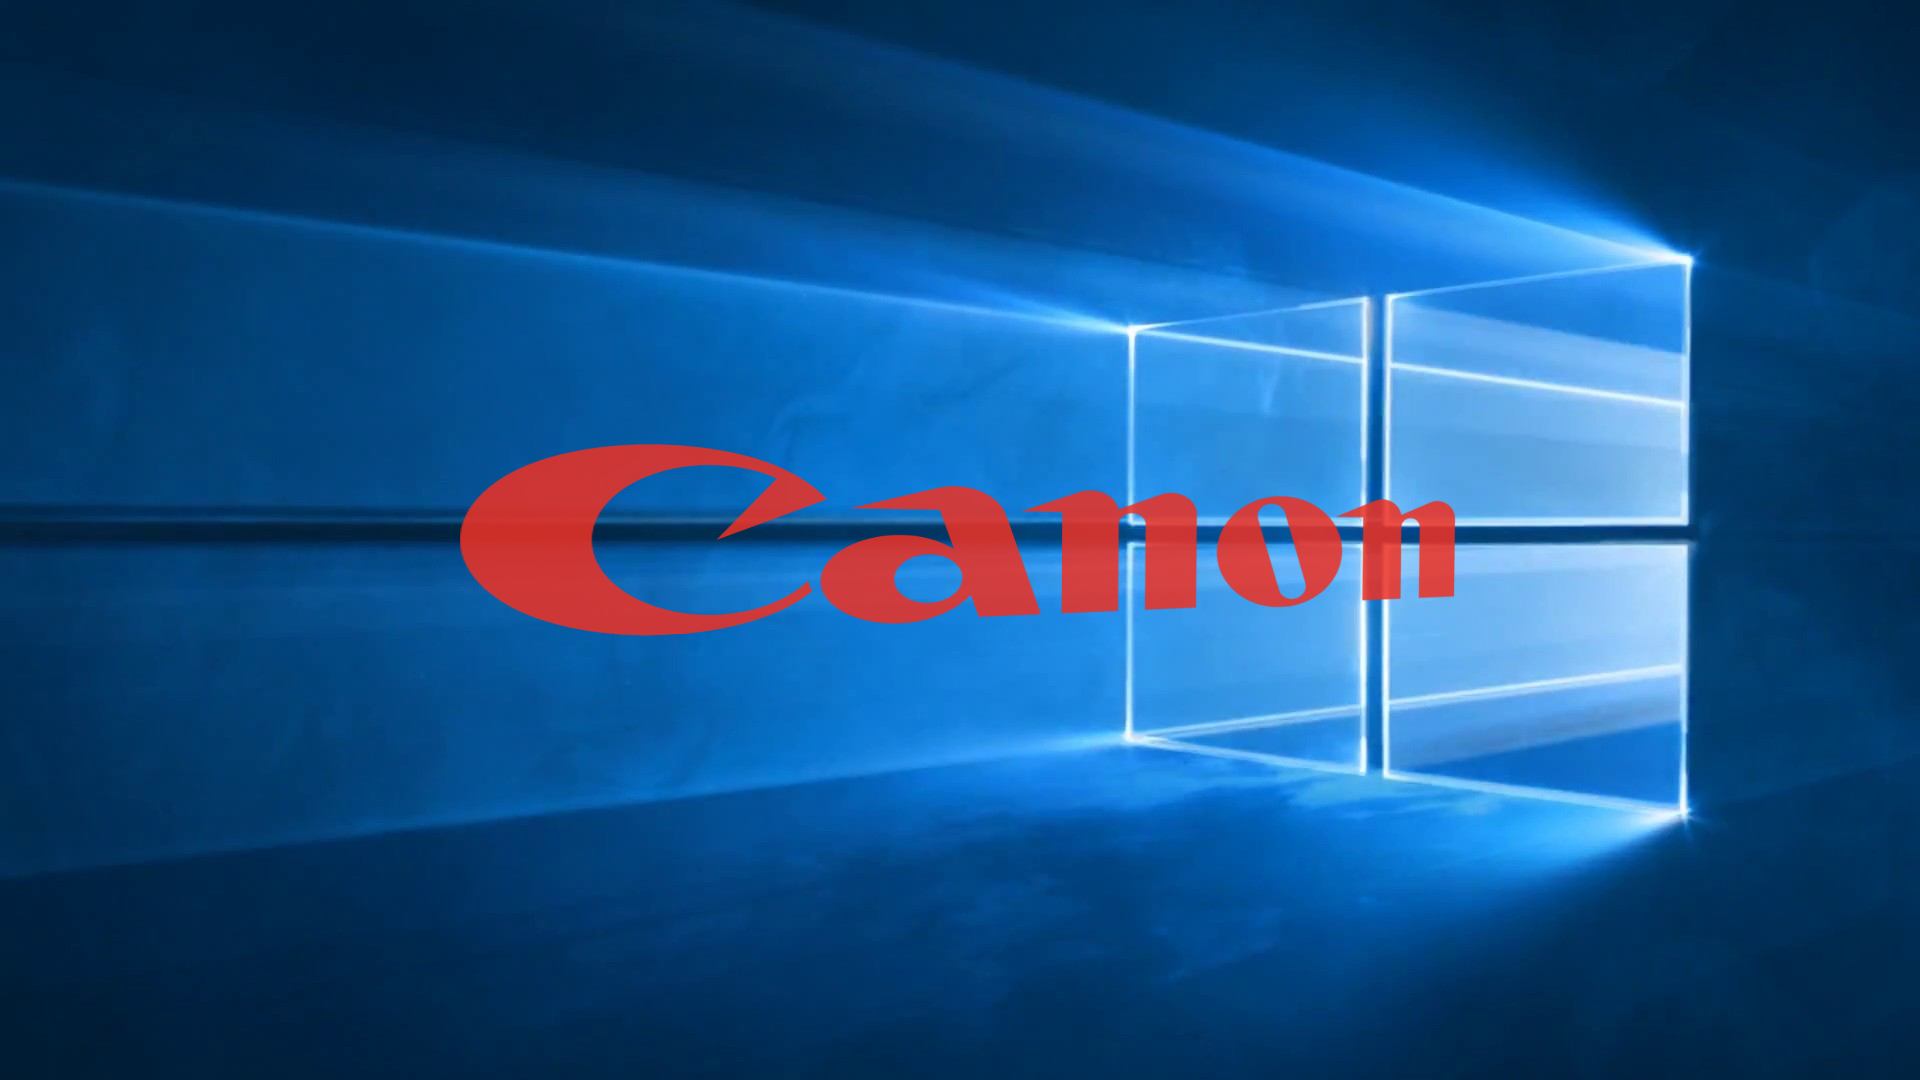 Install Canon MP620 Printer Driver on Windows 10 - Featured